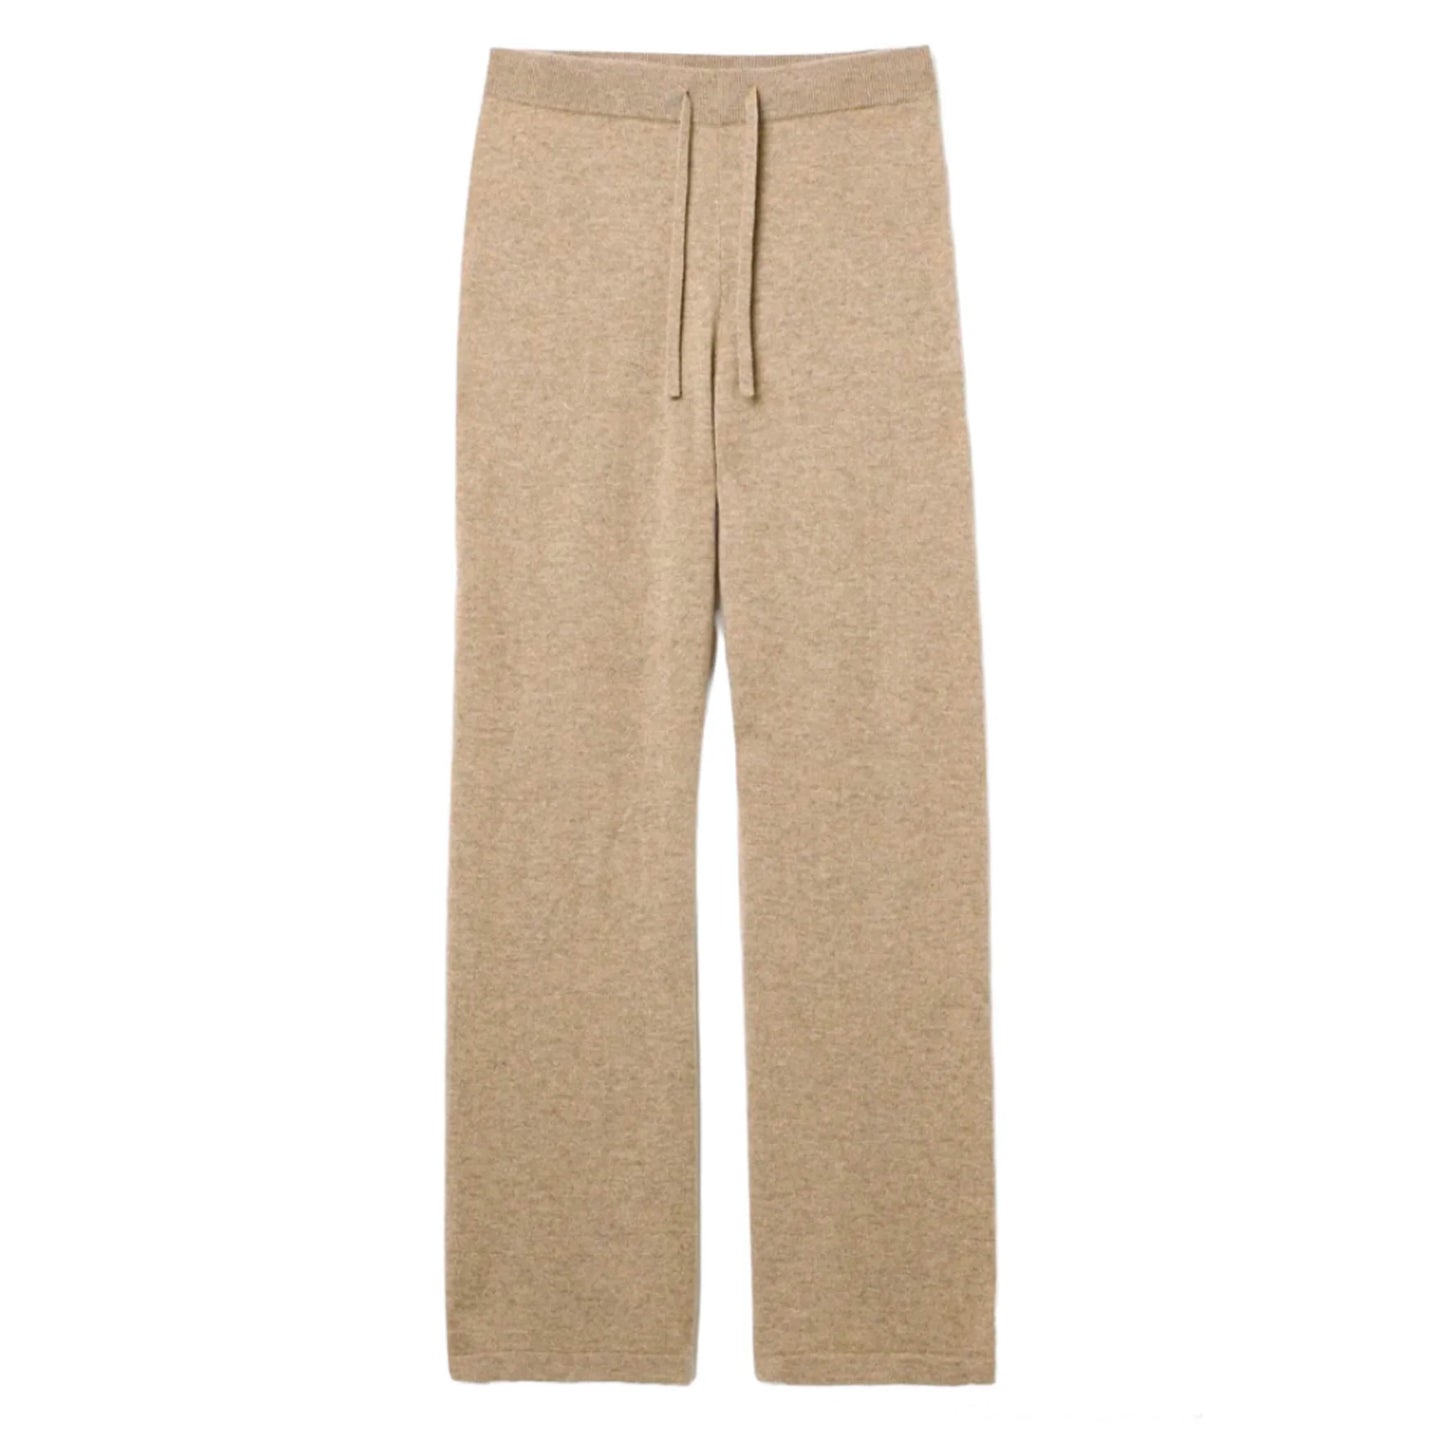 Ven Store Cashmere Trousers - NWOT